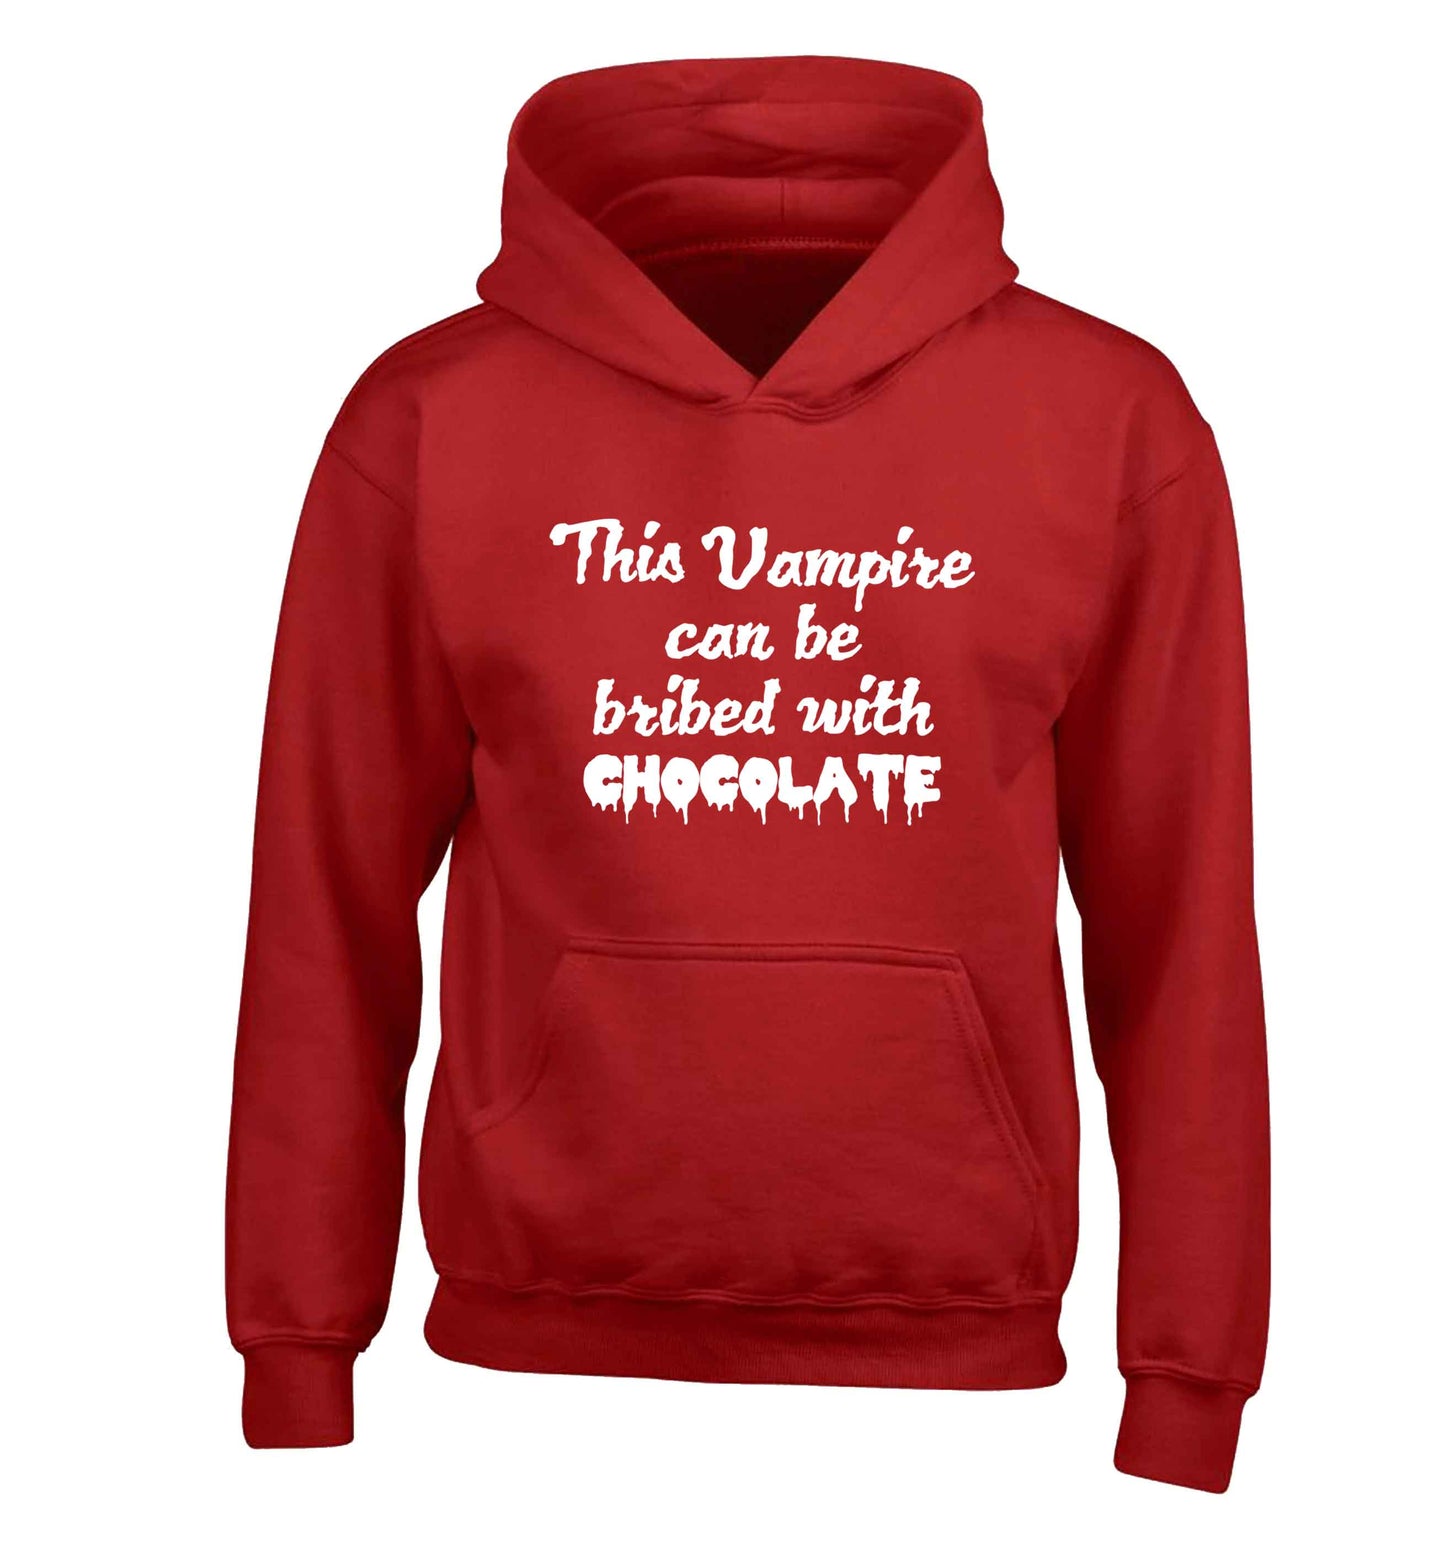 This vampire can be bribed with chocolate children's red hoodie 12-13 Years